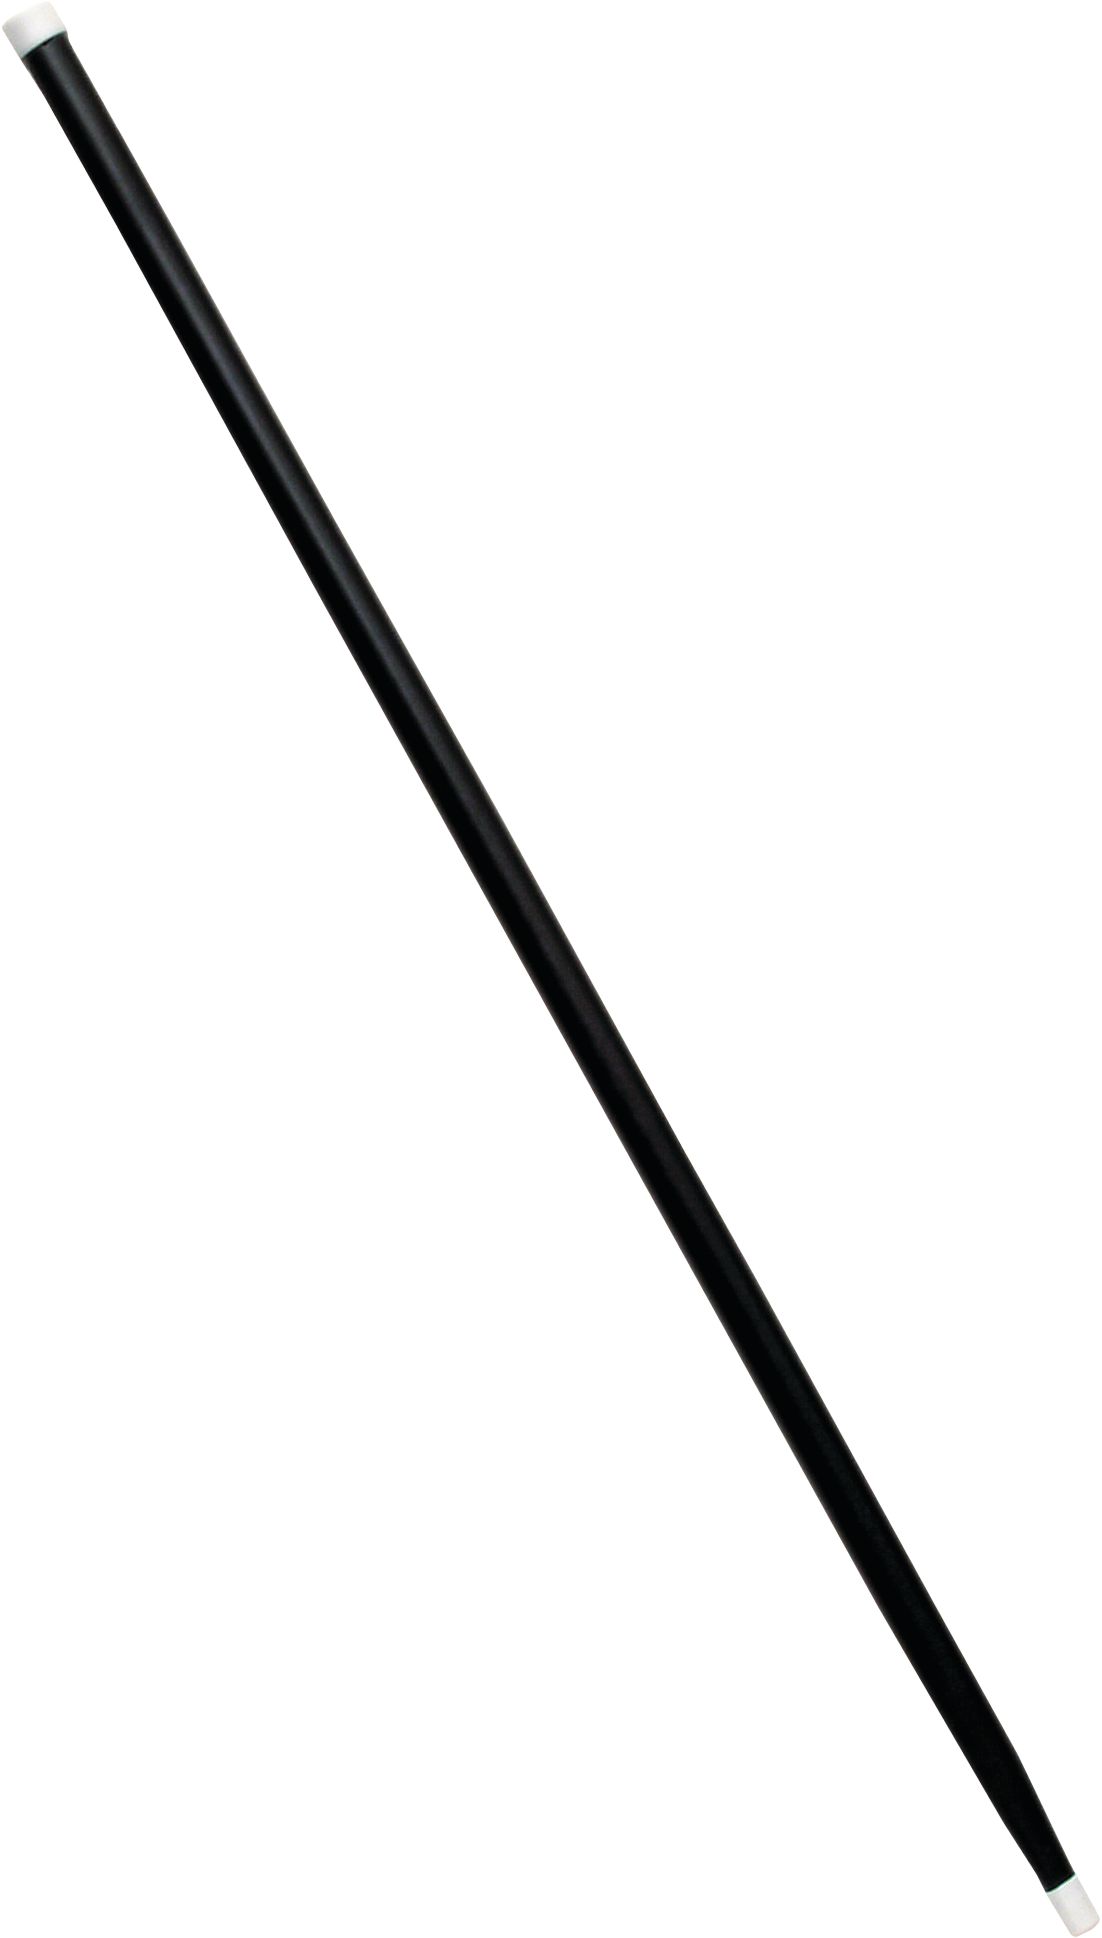 Dance Cane, Black, 36-in, Wearable Costume Prop for Halloween